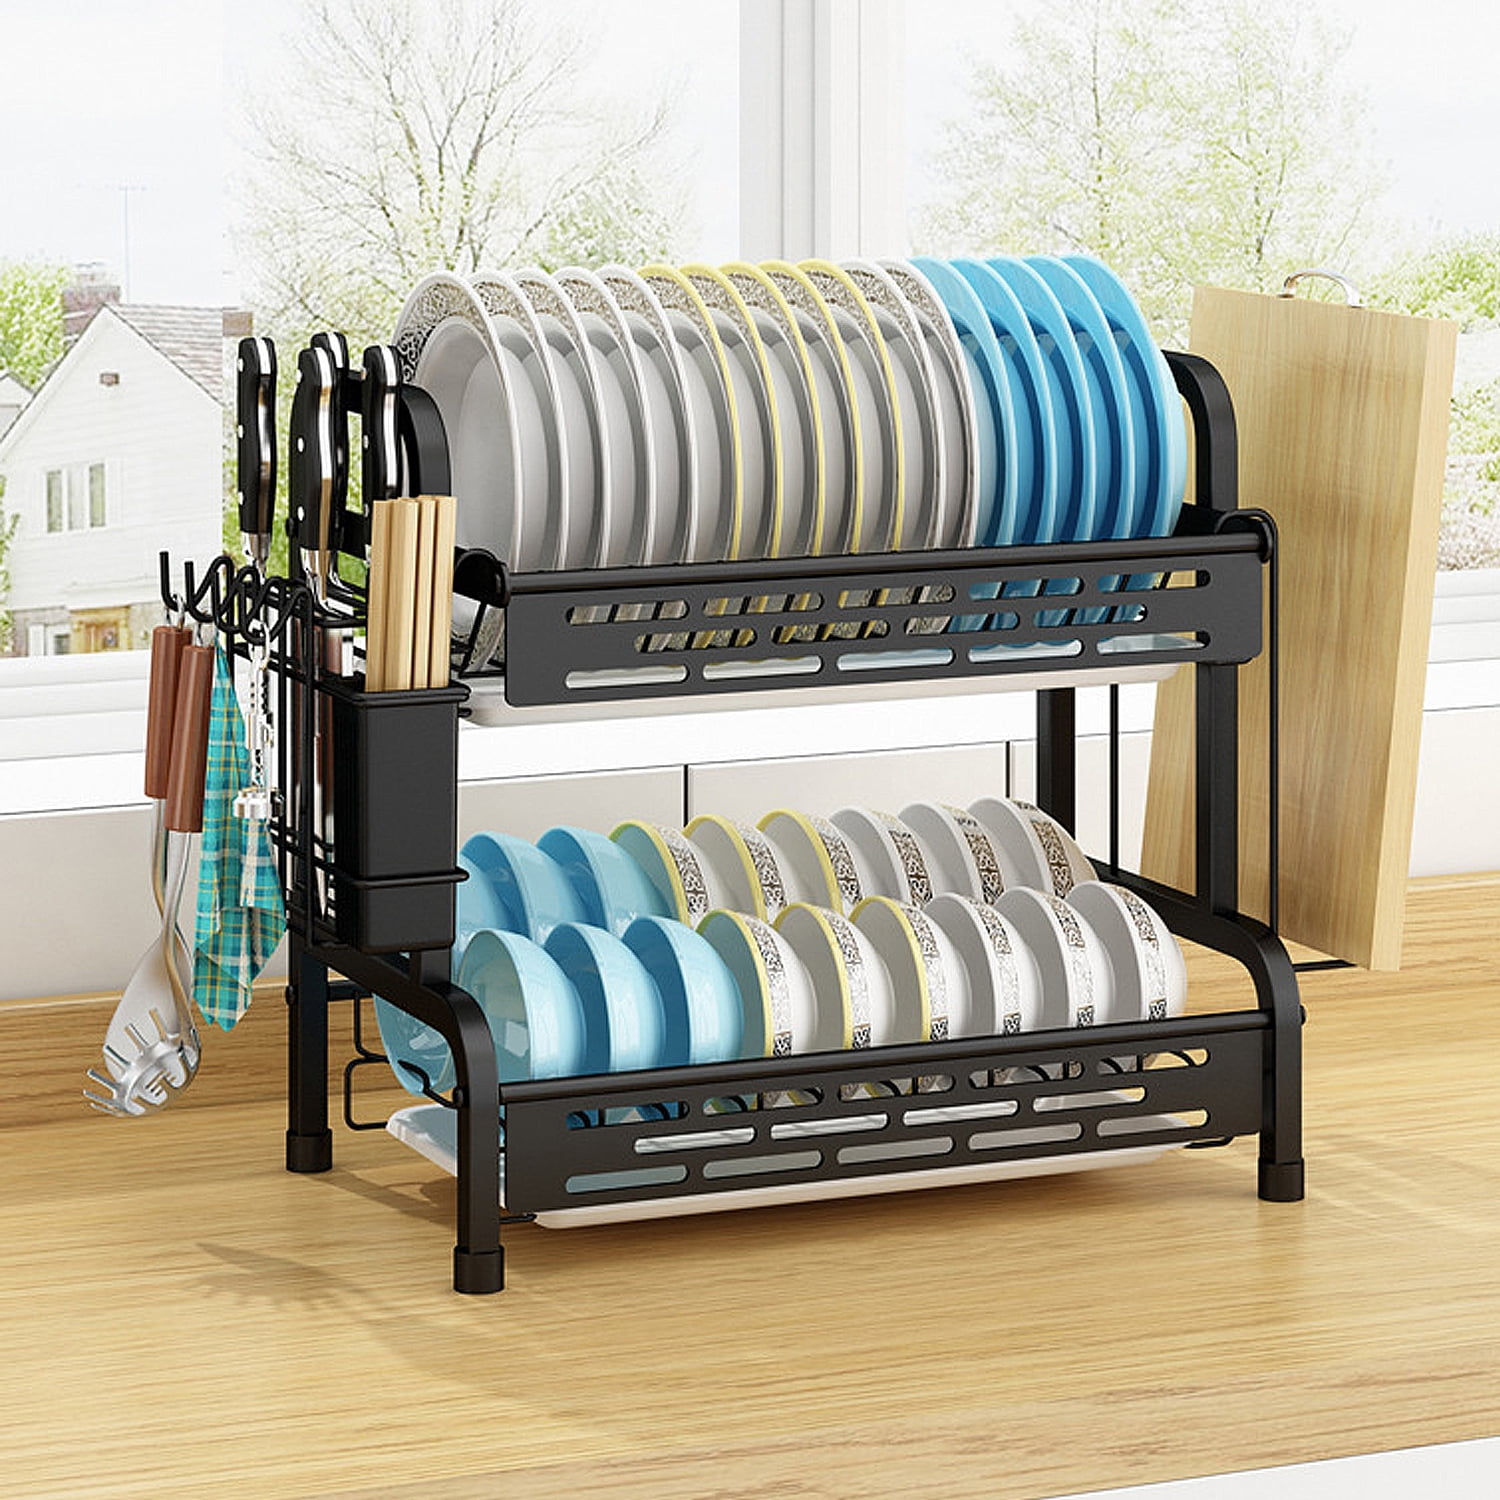 Hovshelf Dish Racks for Kitchen Counter, Dish Drying Rack with Drainboard,  2 Tier Dish Drainers for Kitchen Counter(Black)